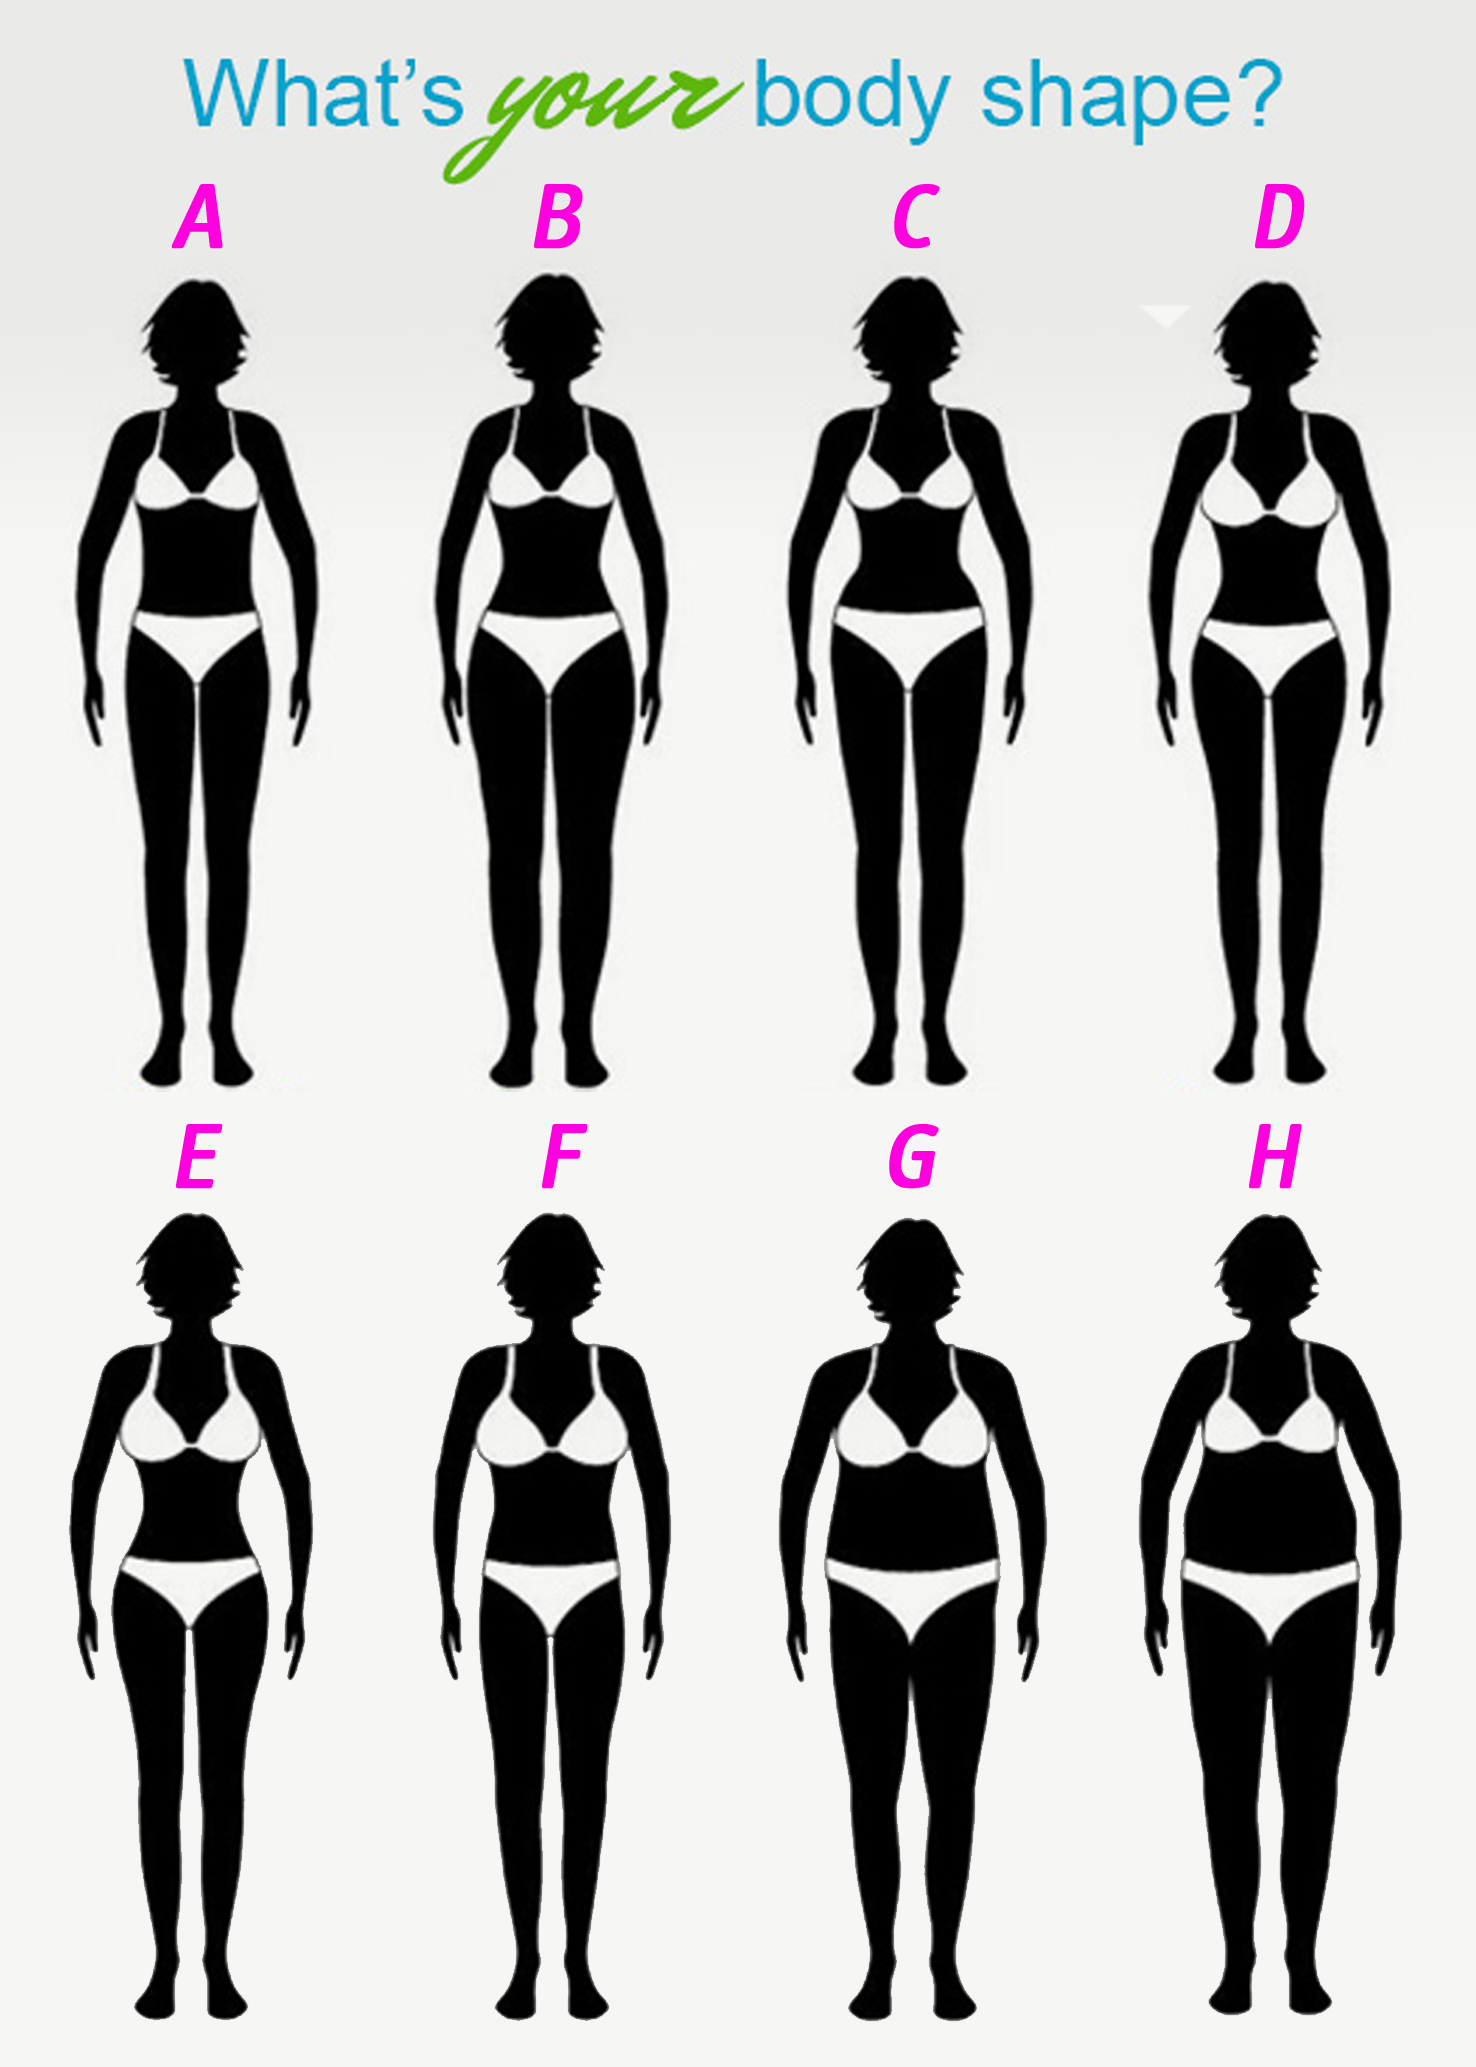 Female Body Shapes Classification